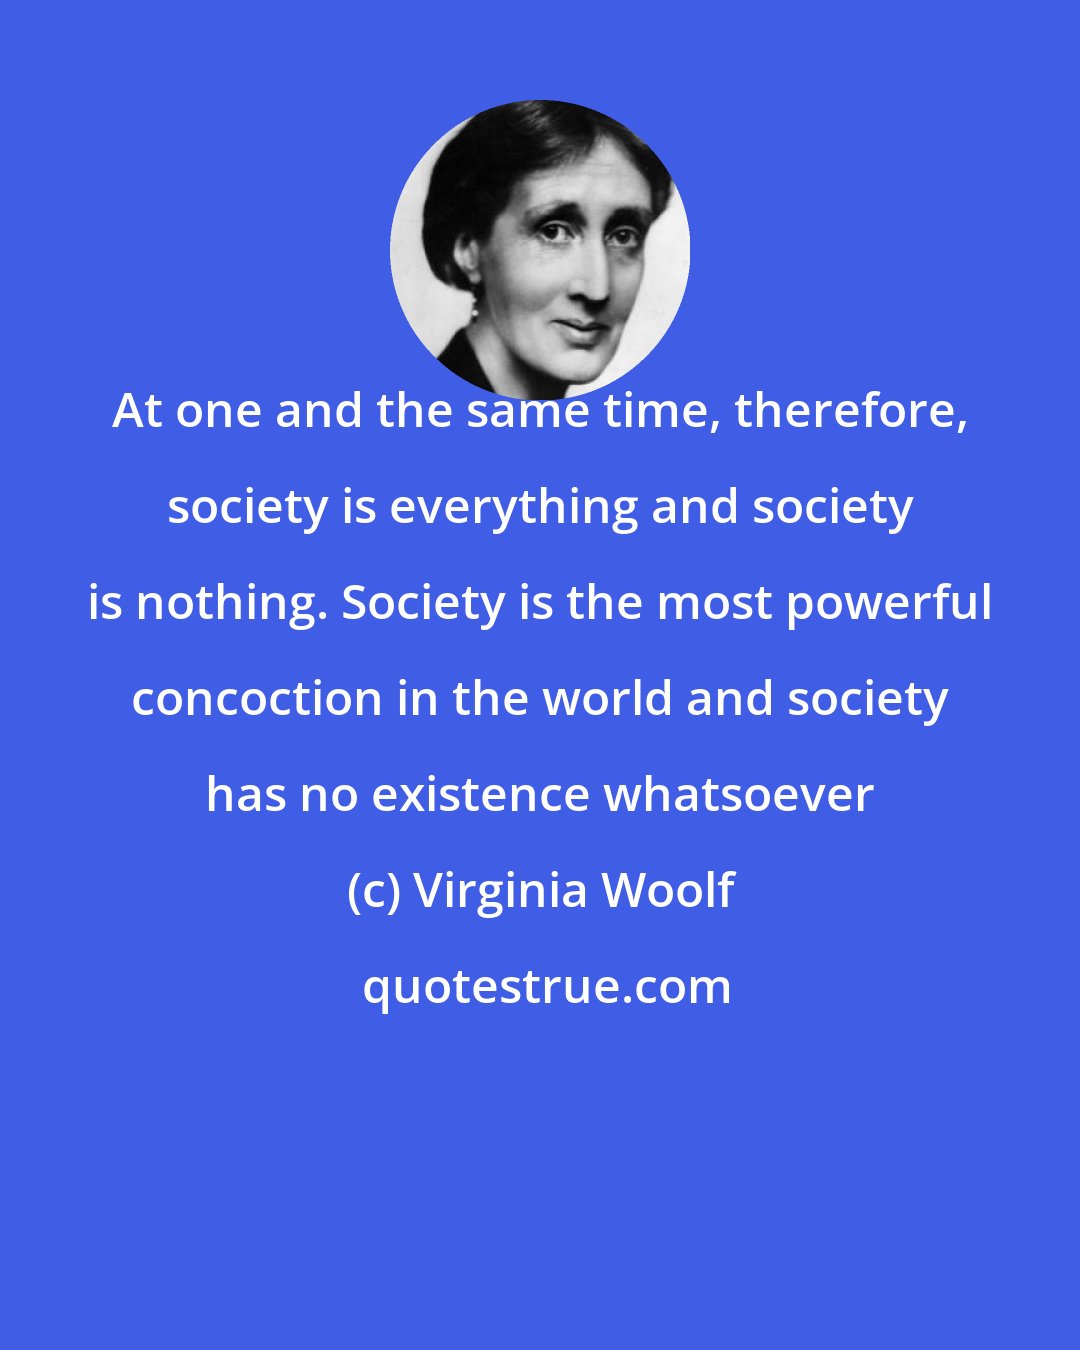 Virginia Woolf: At one and the same time, therefore, society is everything and society is nothing. Society is the most powerful concoction in the world and society has no existence whatsoever